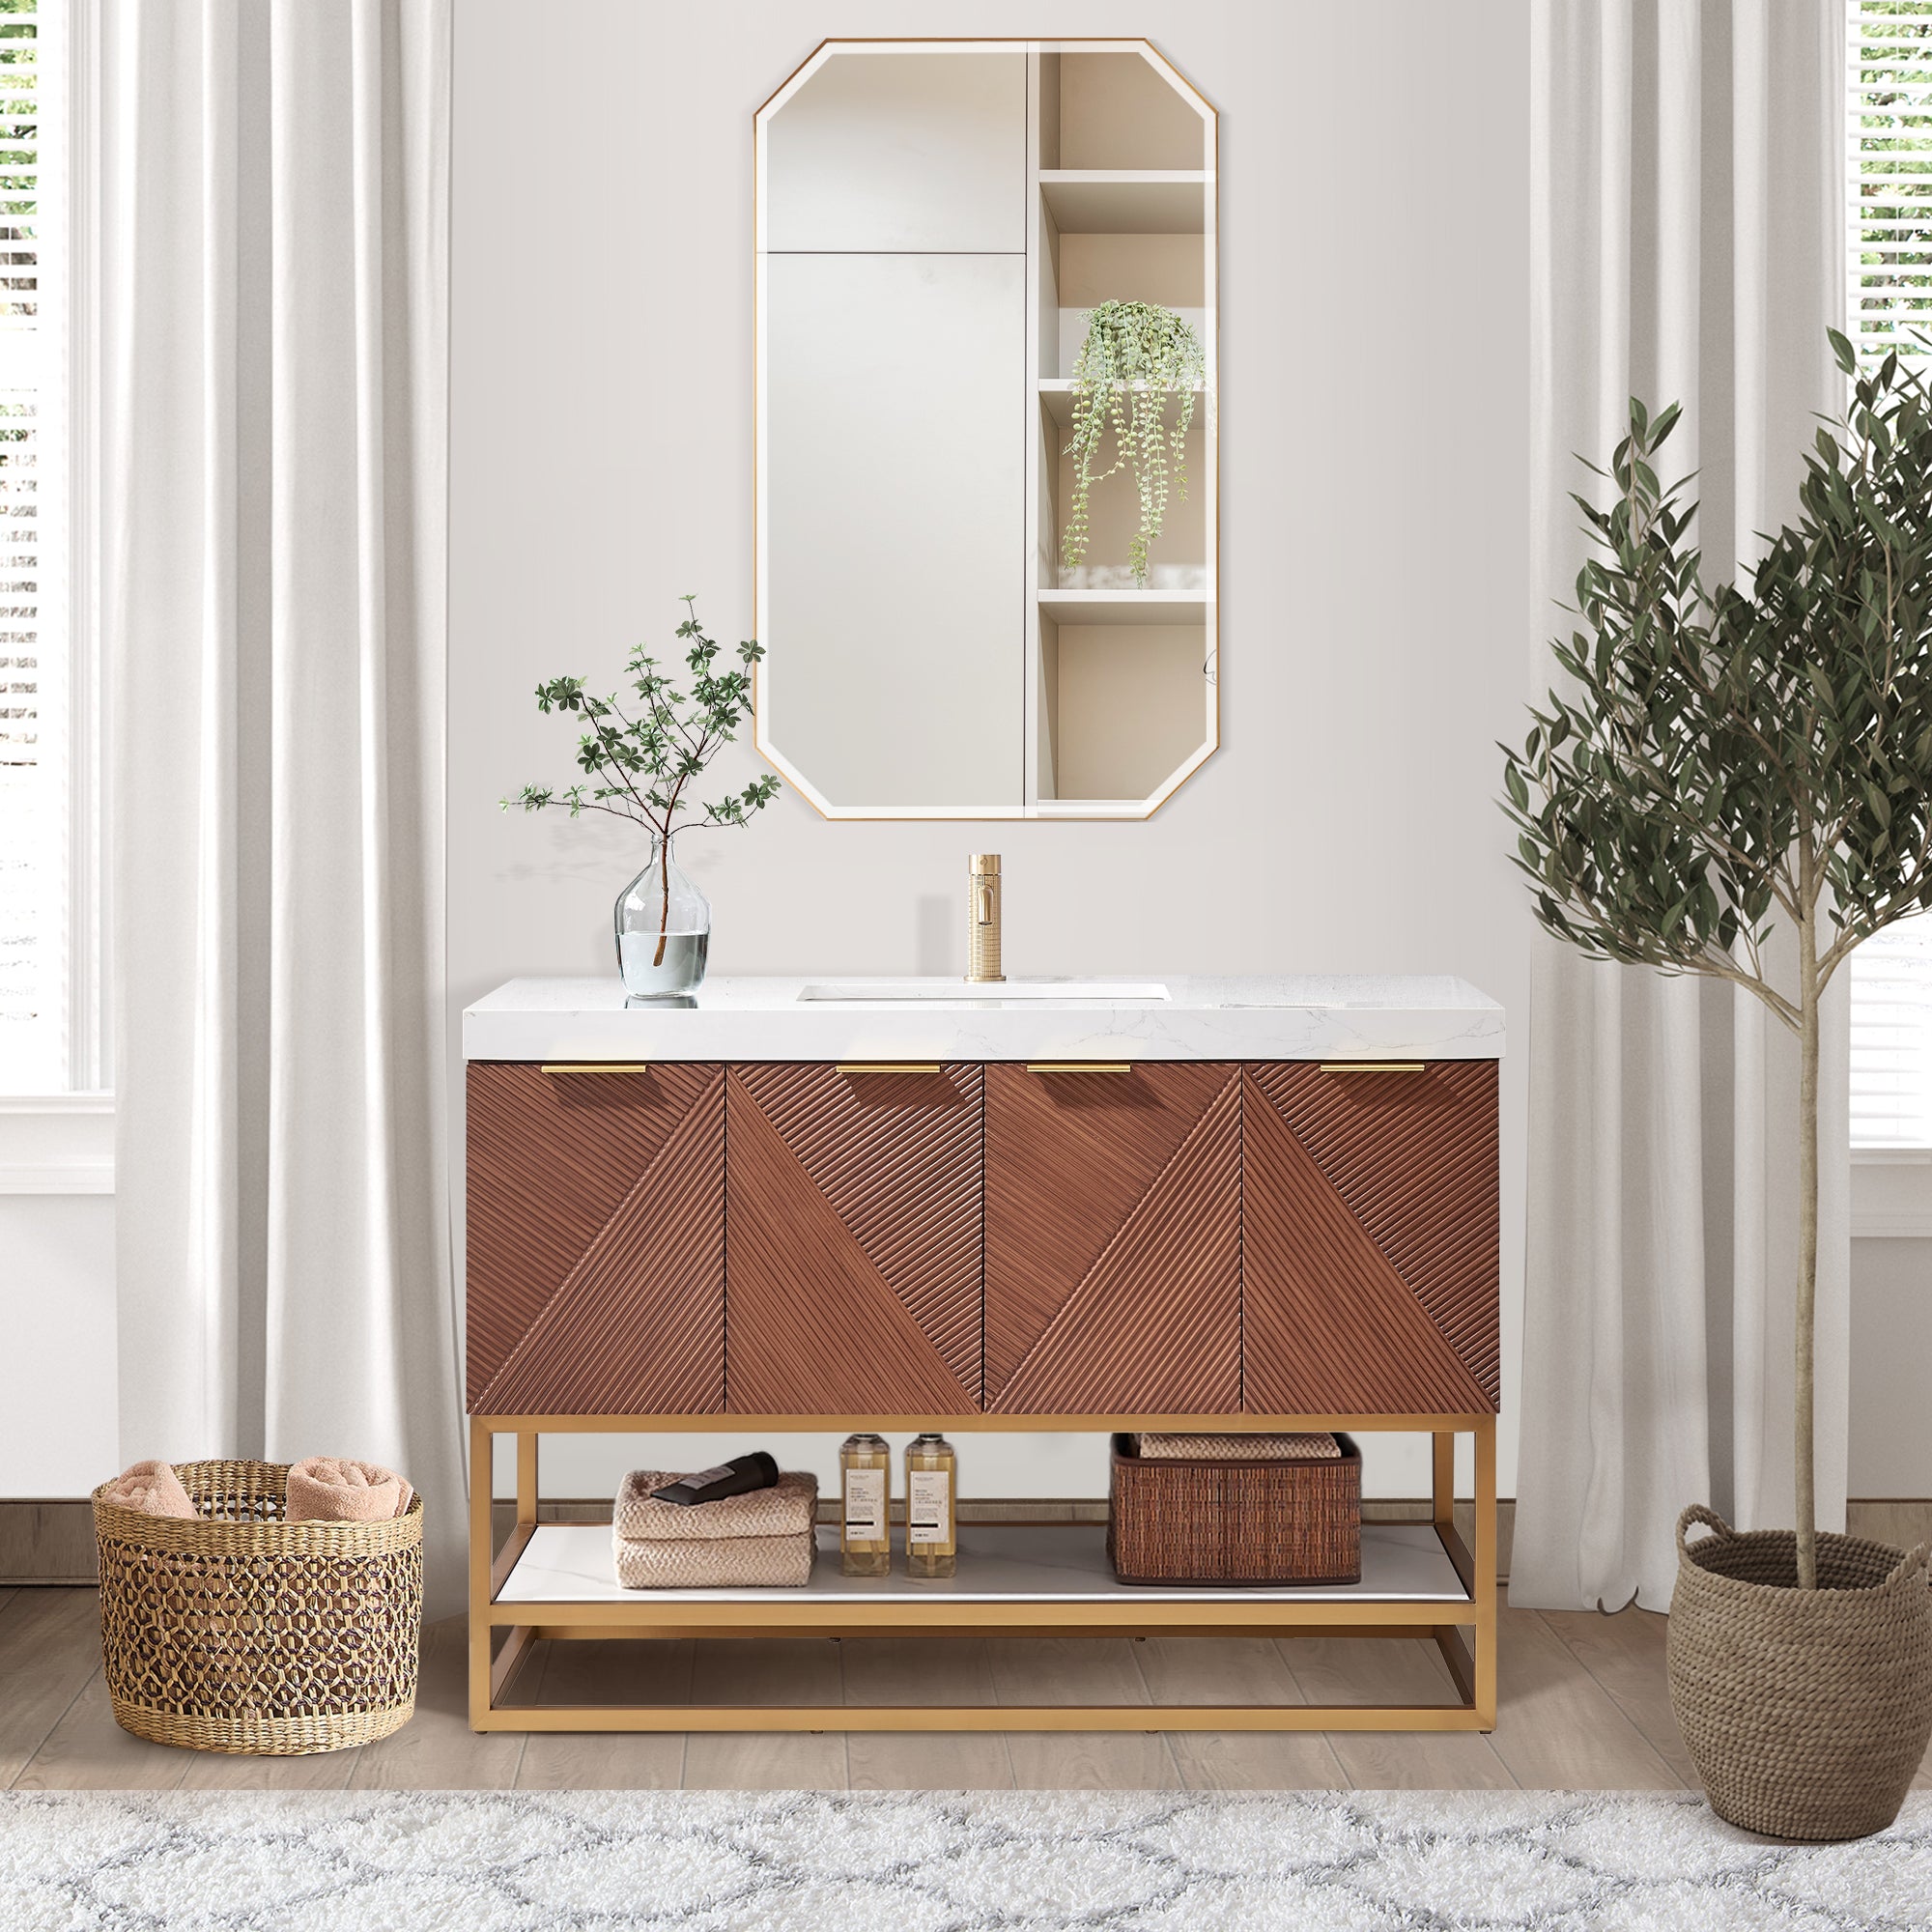 Mahon 48G" Free-standing Single Bath Vanity in North American Deep Walnut with White Grain Composite Stone Top